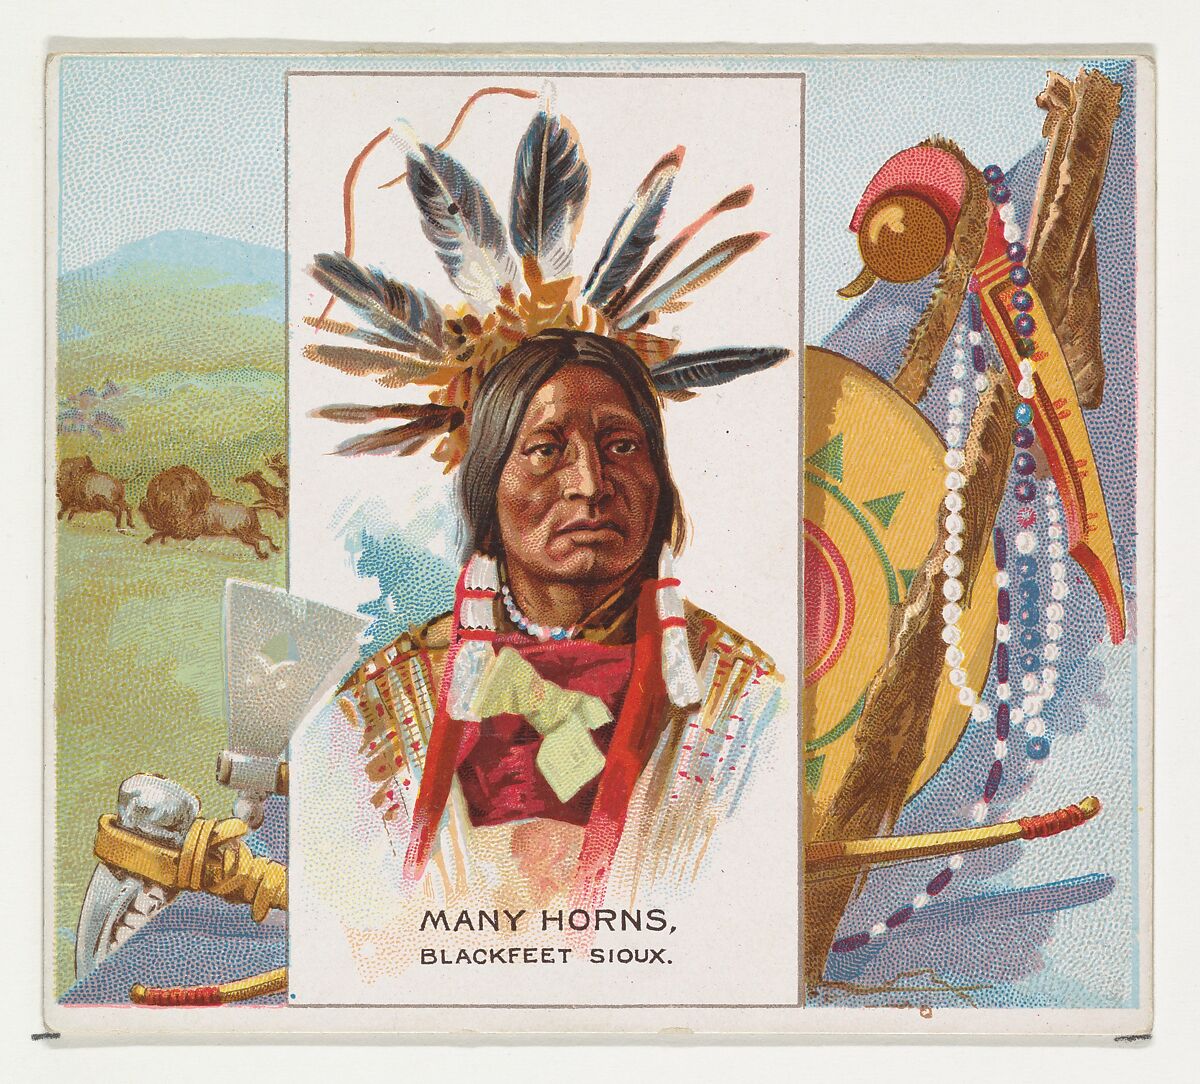 Many Horns, Blackfeet Sioux, from the American Indian Chiefs series (N36) for Allen & Ginter Cigarettes, Issued by Allen &amp; Ginter (American, Richmond, Virginia), Commercial color lithograph 